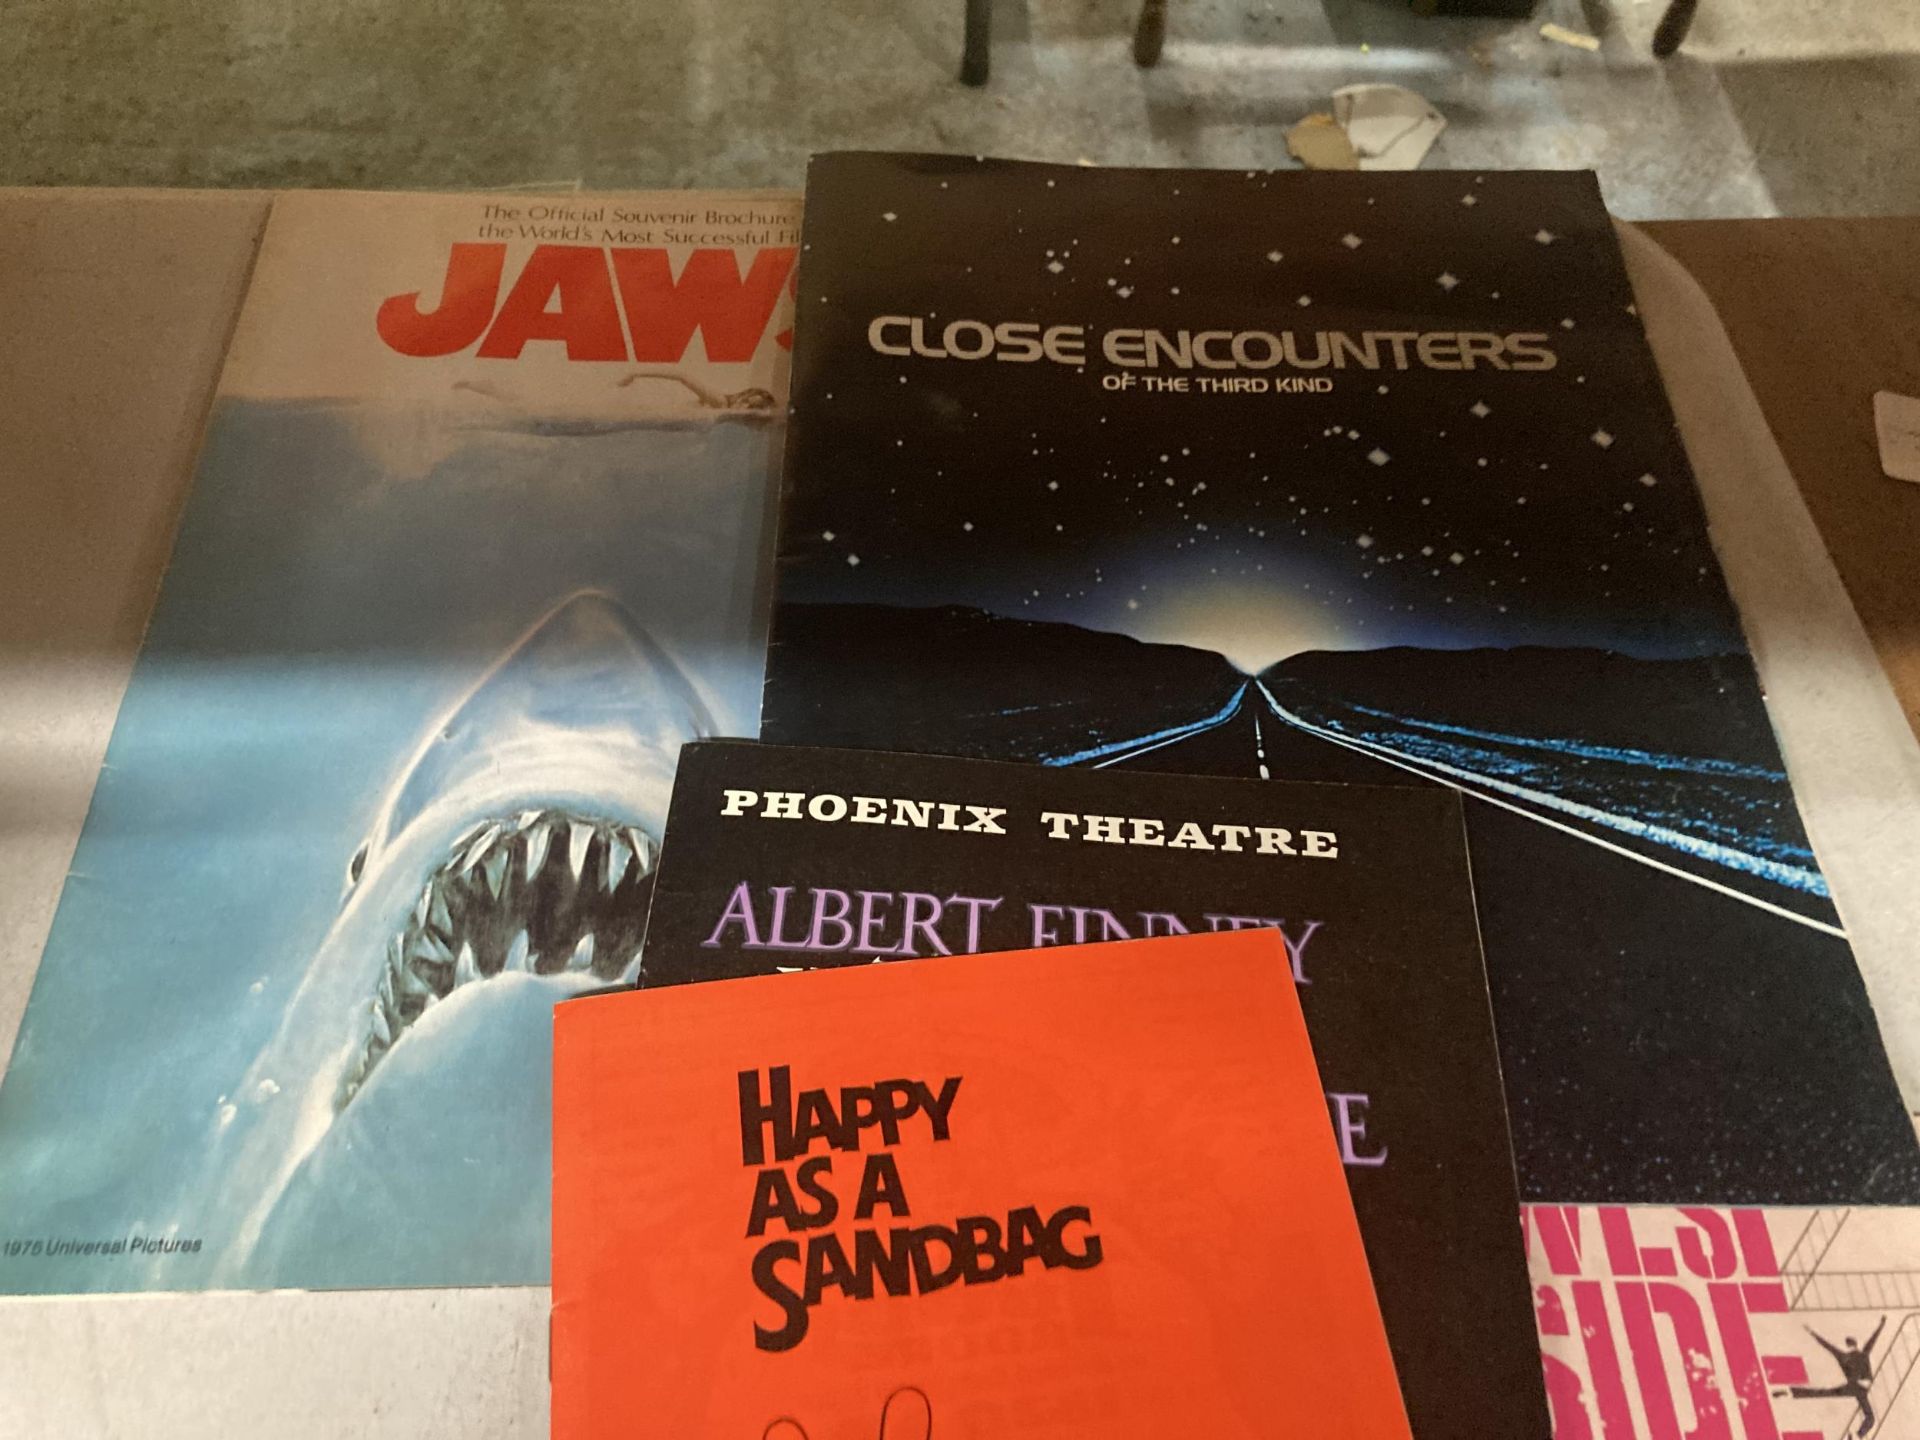 A QUANTITY OF THEATRE AND CINEMA BROCHURES TO INCLUDE JAWS, CLOSE ENCOUNTERS, WEST SIDE STORY, ETC - Image 2 of 3